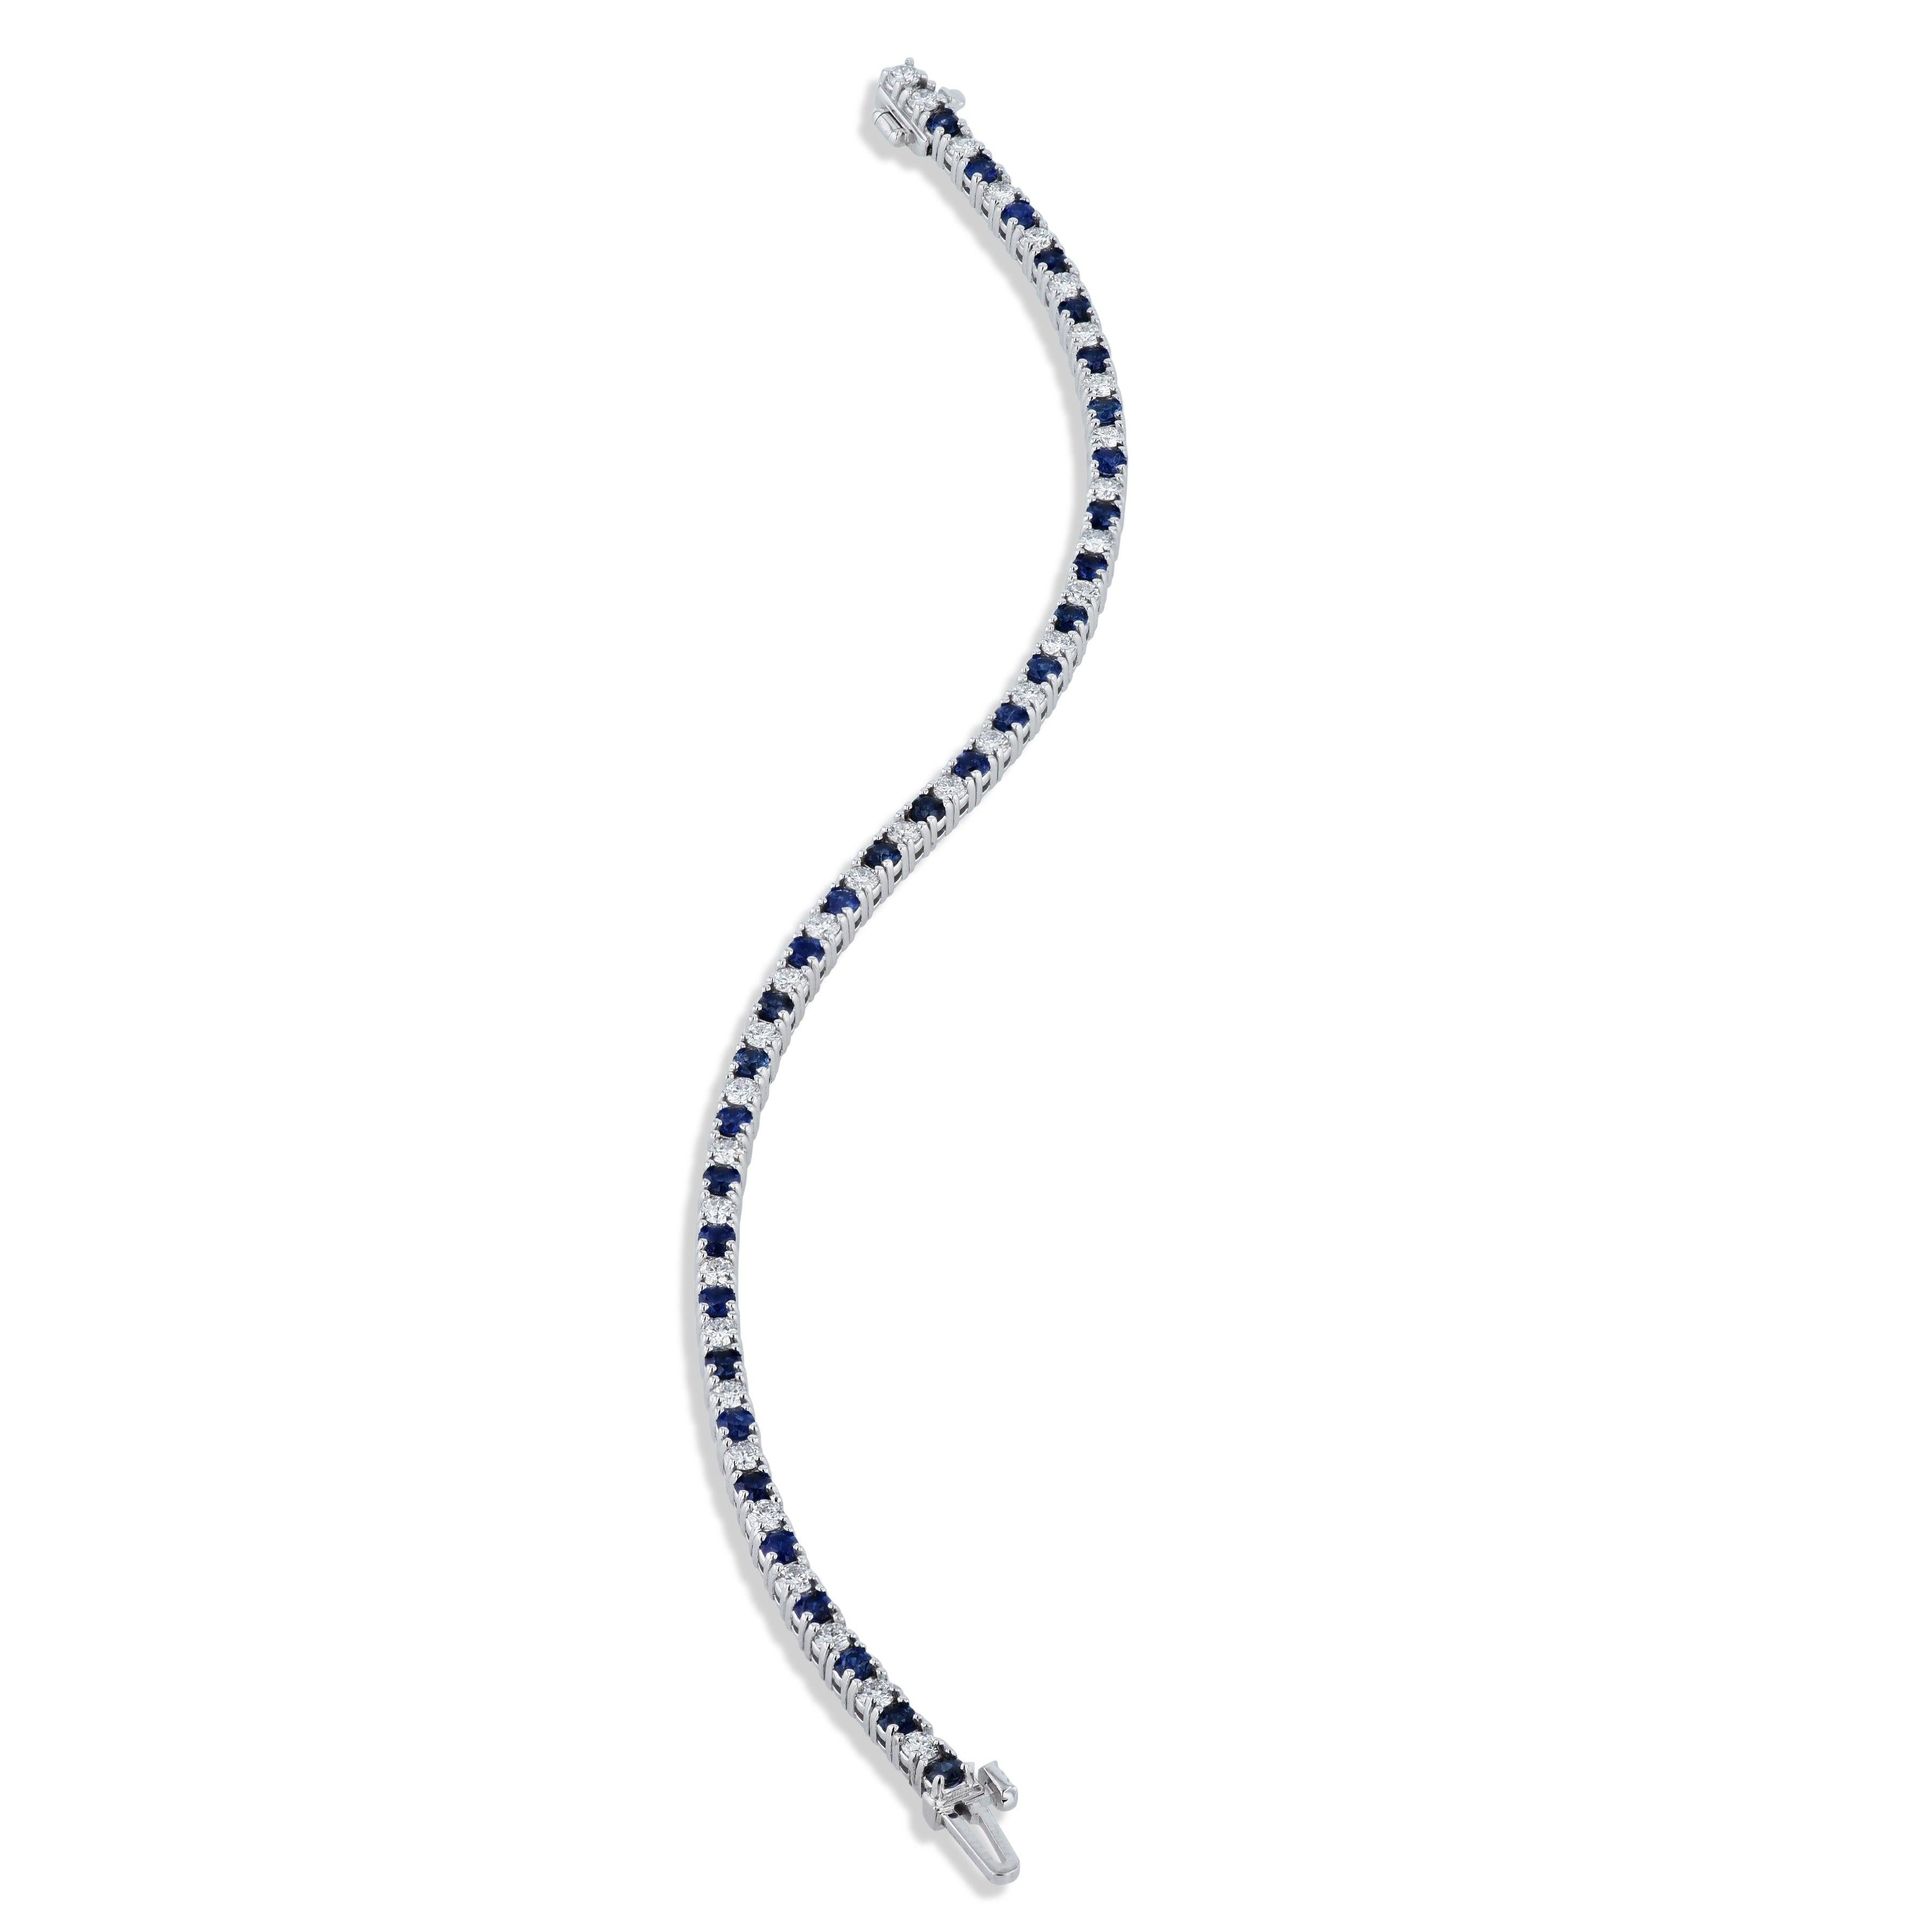 This glamorous 18kt white gold tennis bracelet features a dazzling spectacle of 32 royal blue sapphires and 33 diamonds, totaling an impressive 4.23 carat. Unmatched in brilliance and craftsmanship, it's the perfect gift to express love and